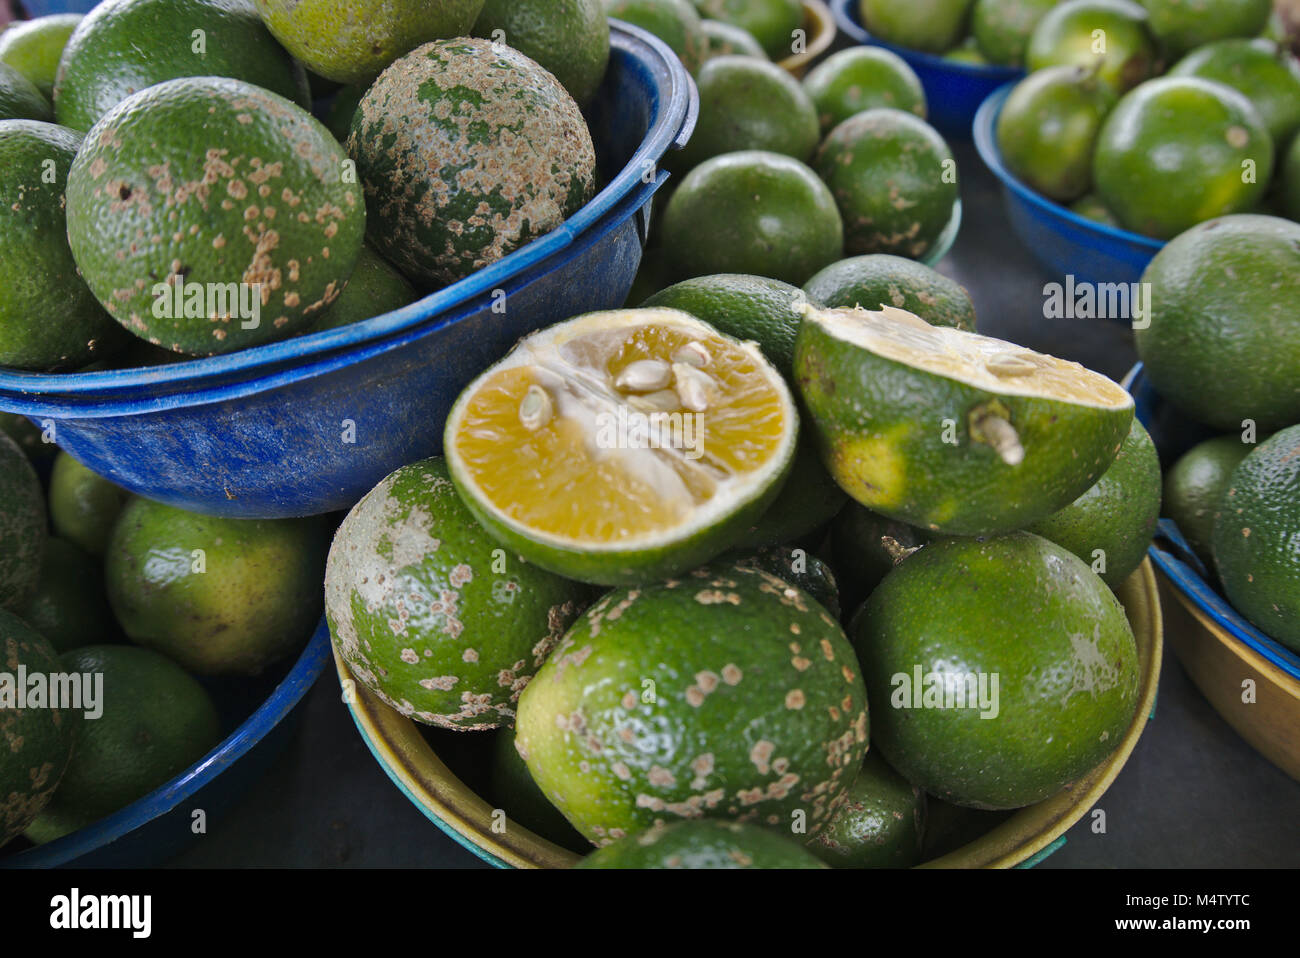 Lime on fruit bank at a farmers market stall. Stock Photo